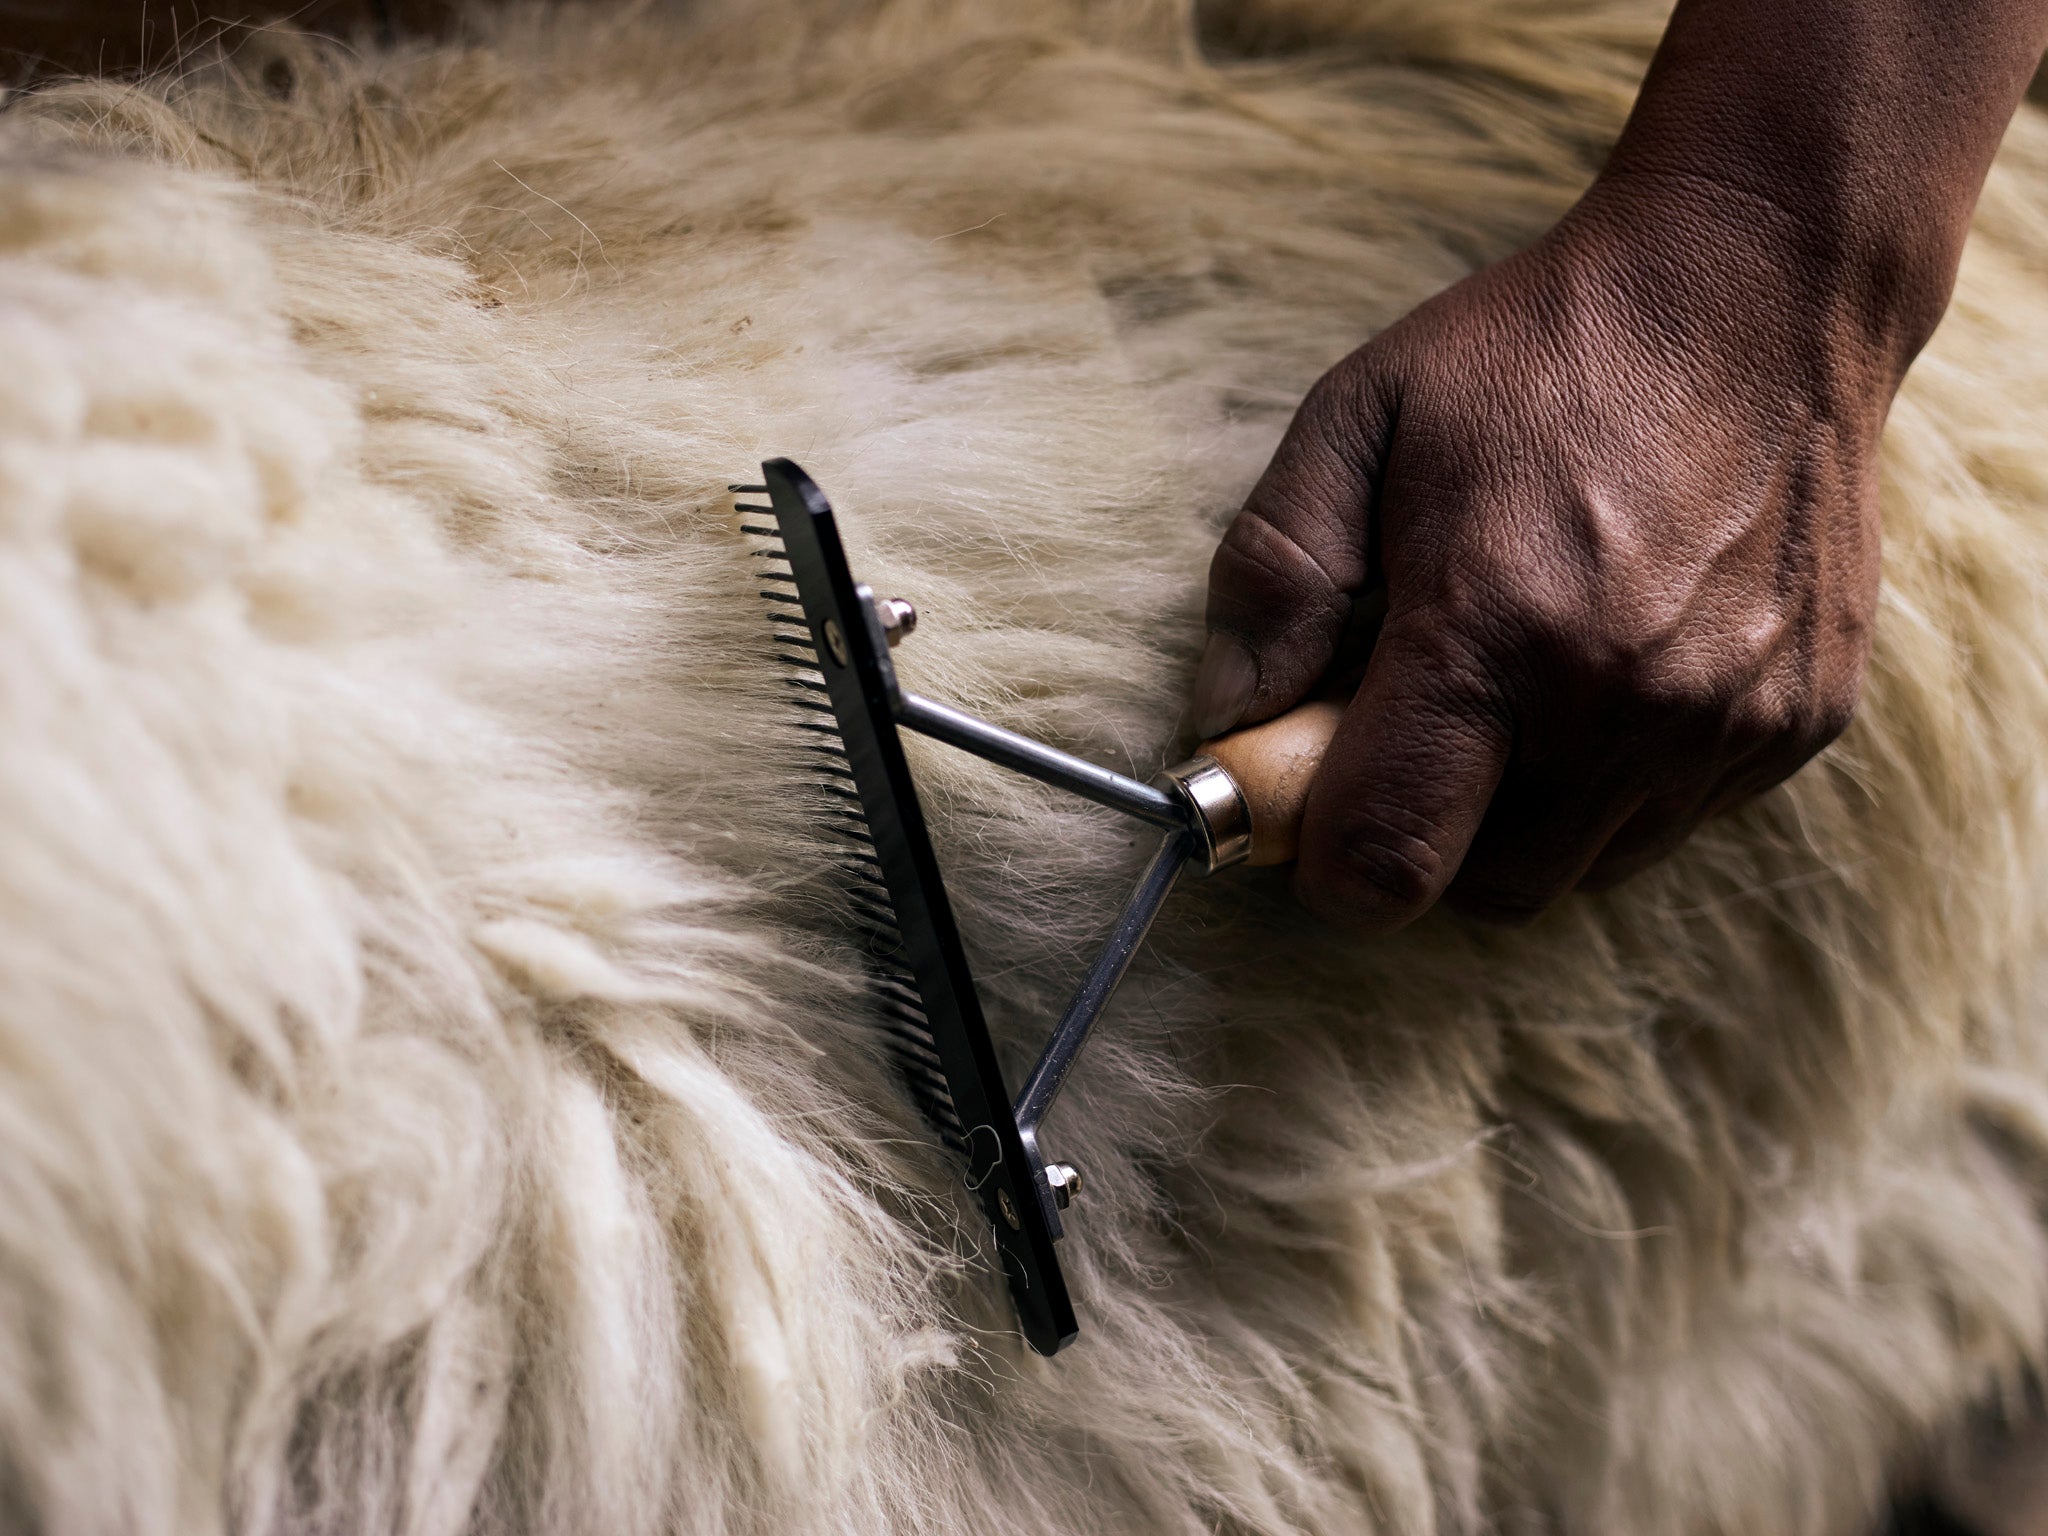 Each spring the goats endure a delicate combing process, which harvests wool from below the chin and underbelly